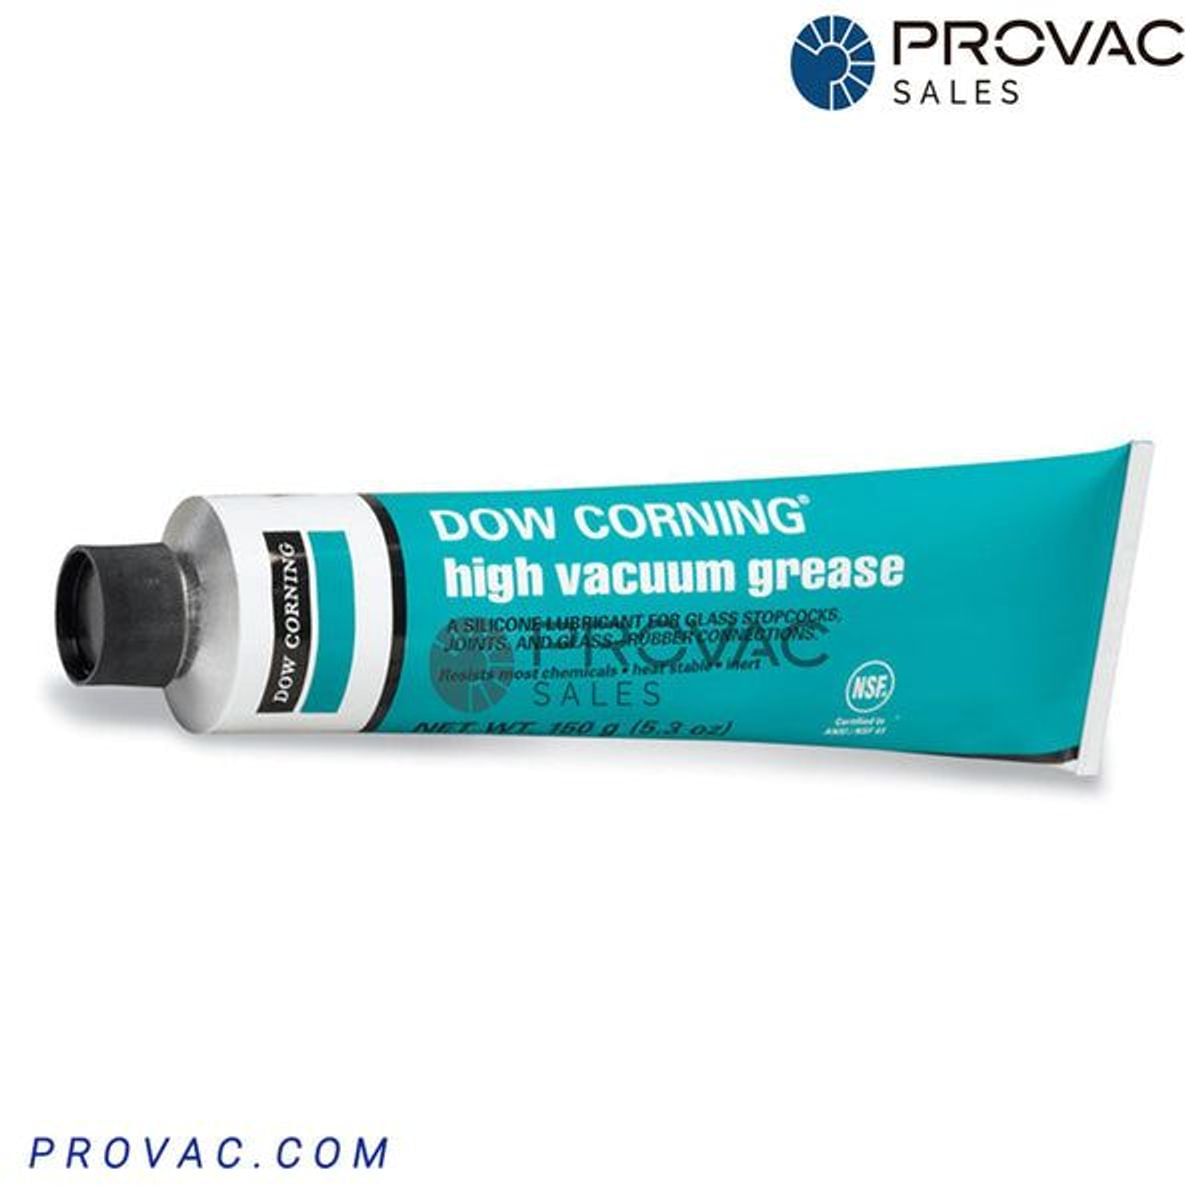 Dow Corning DC-976 High Vacuum Grease Image 1